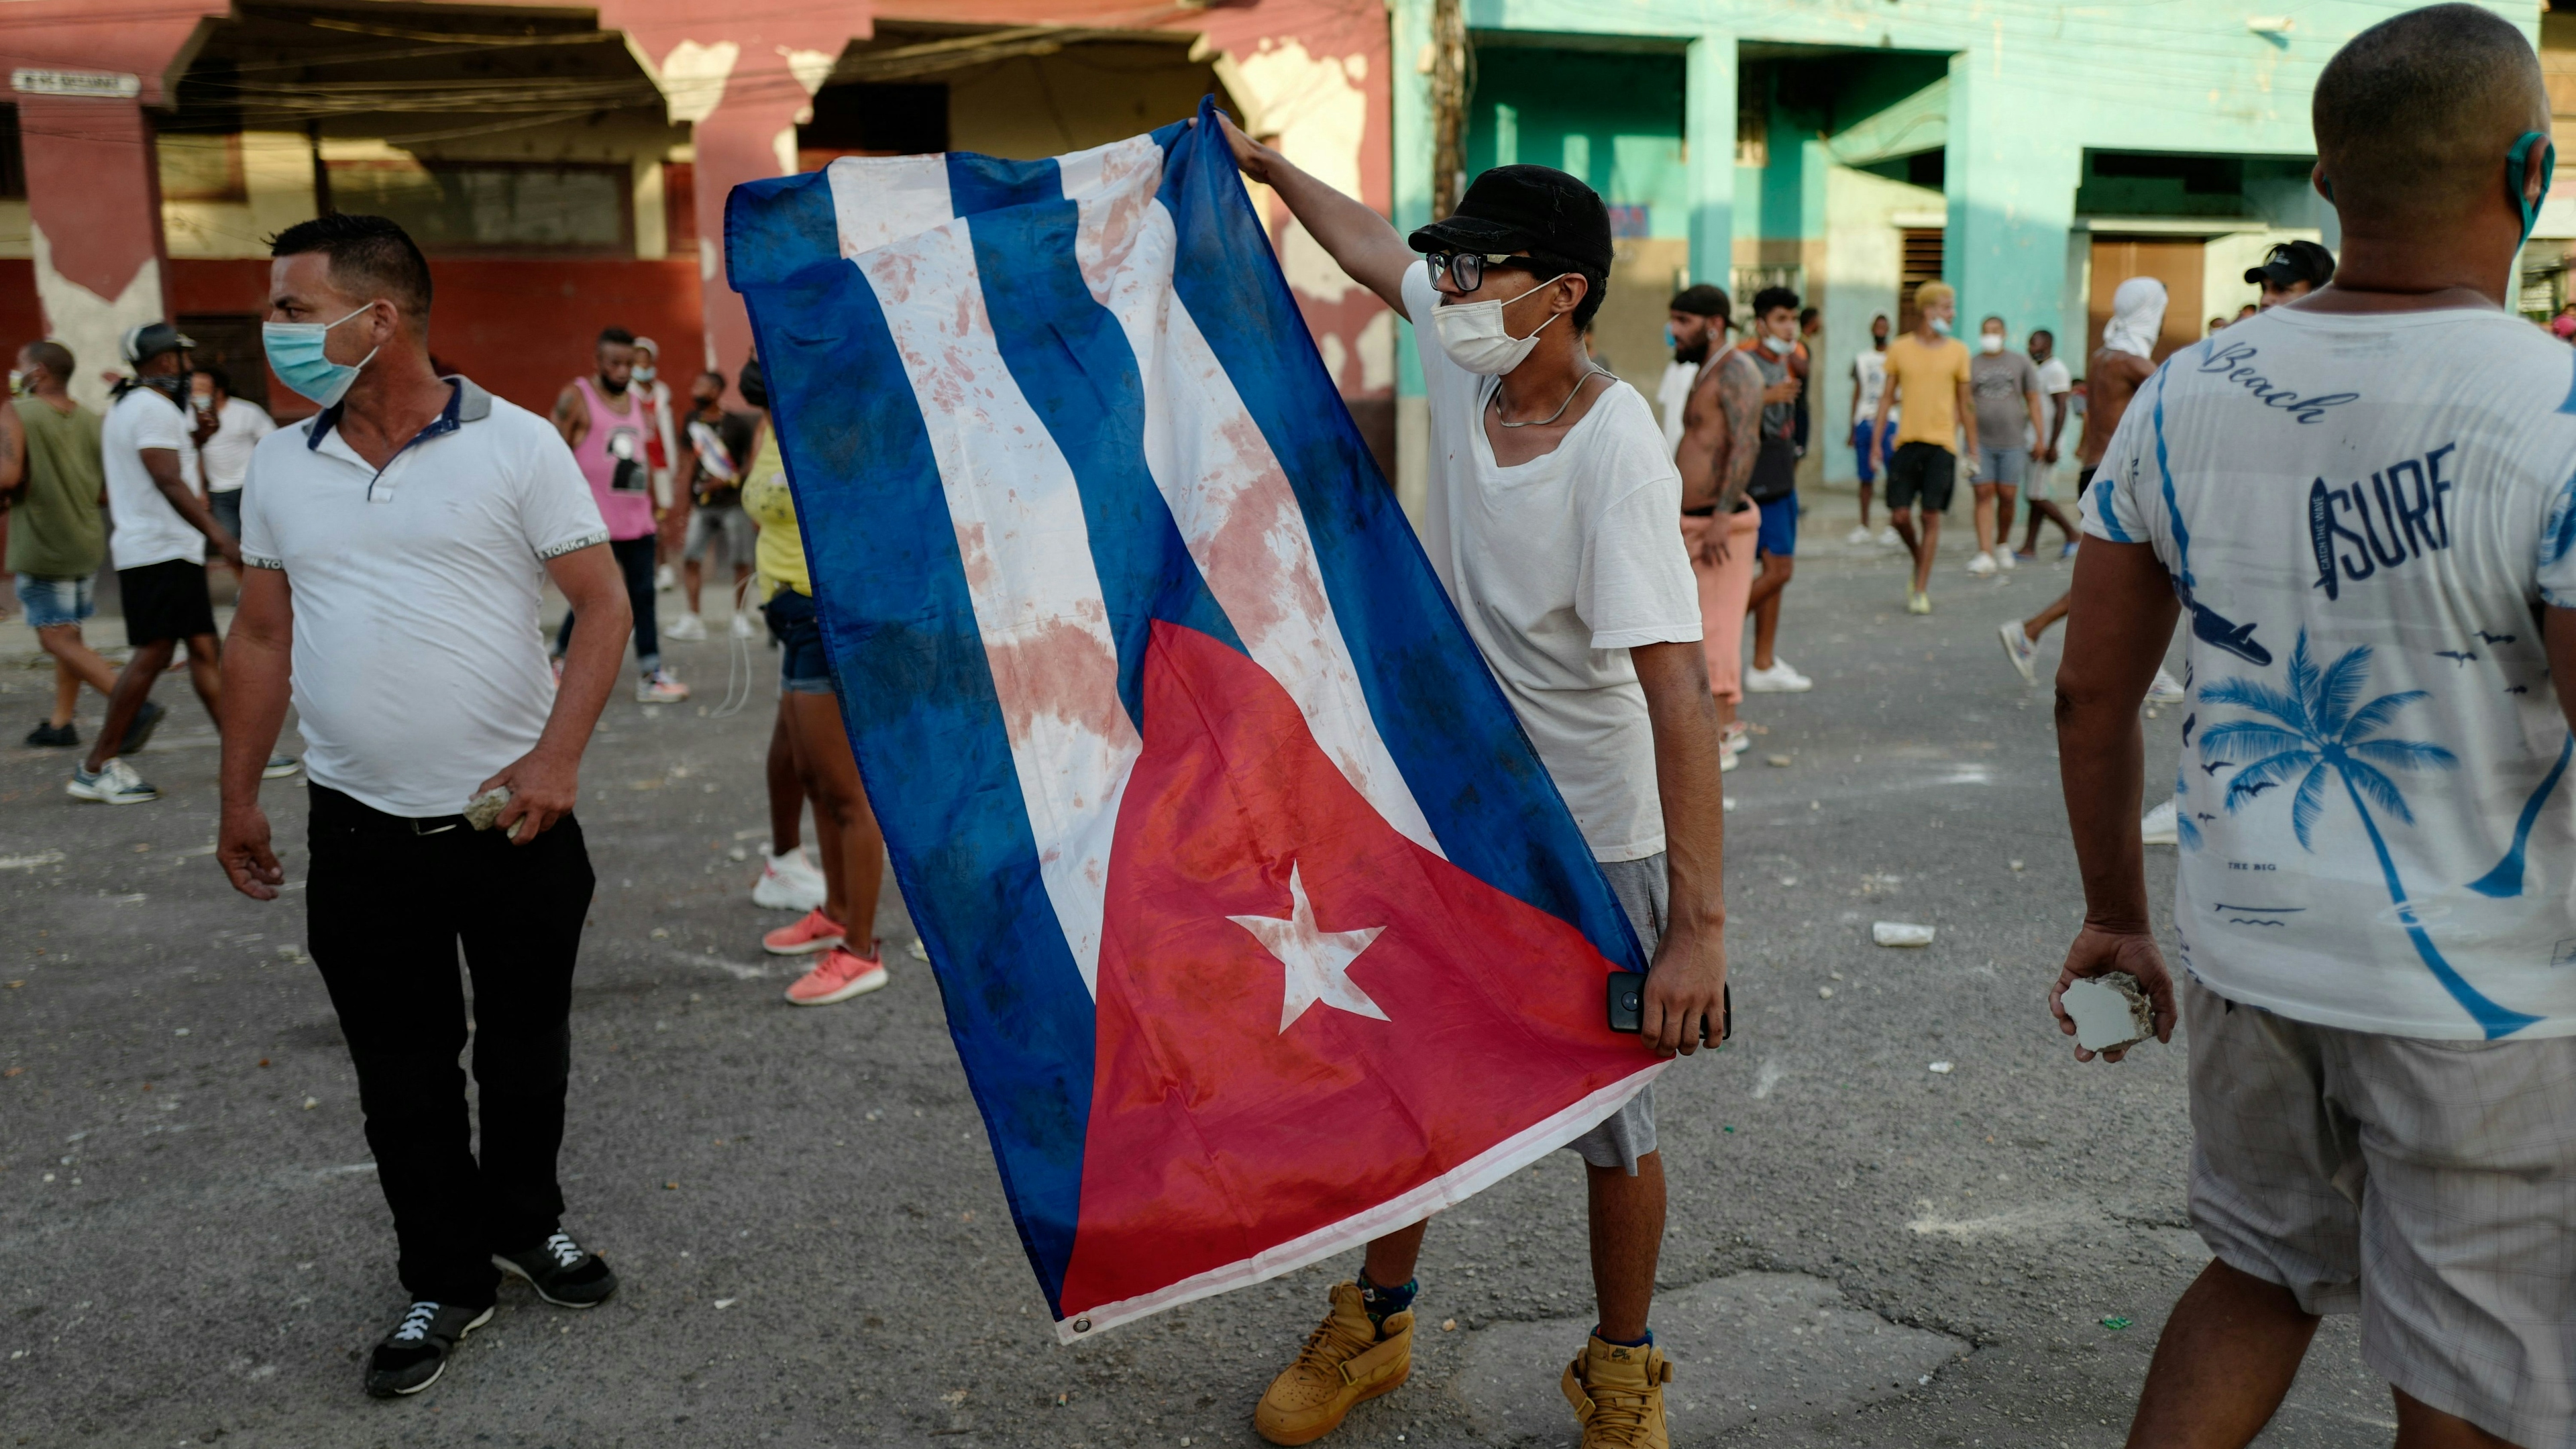 A man waves a Cuban flag during a demonstration against the government of Cuba